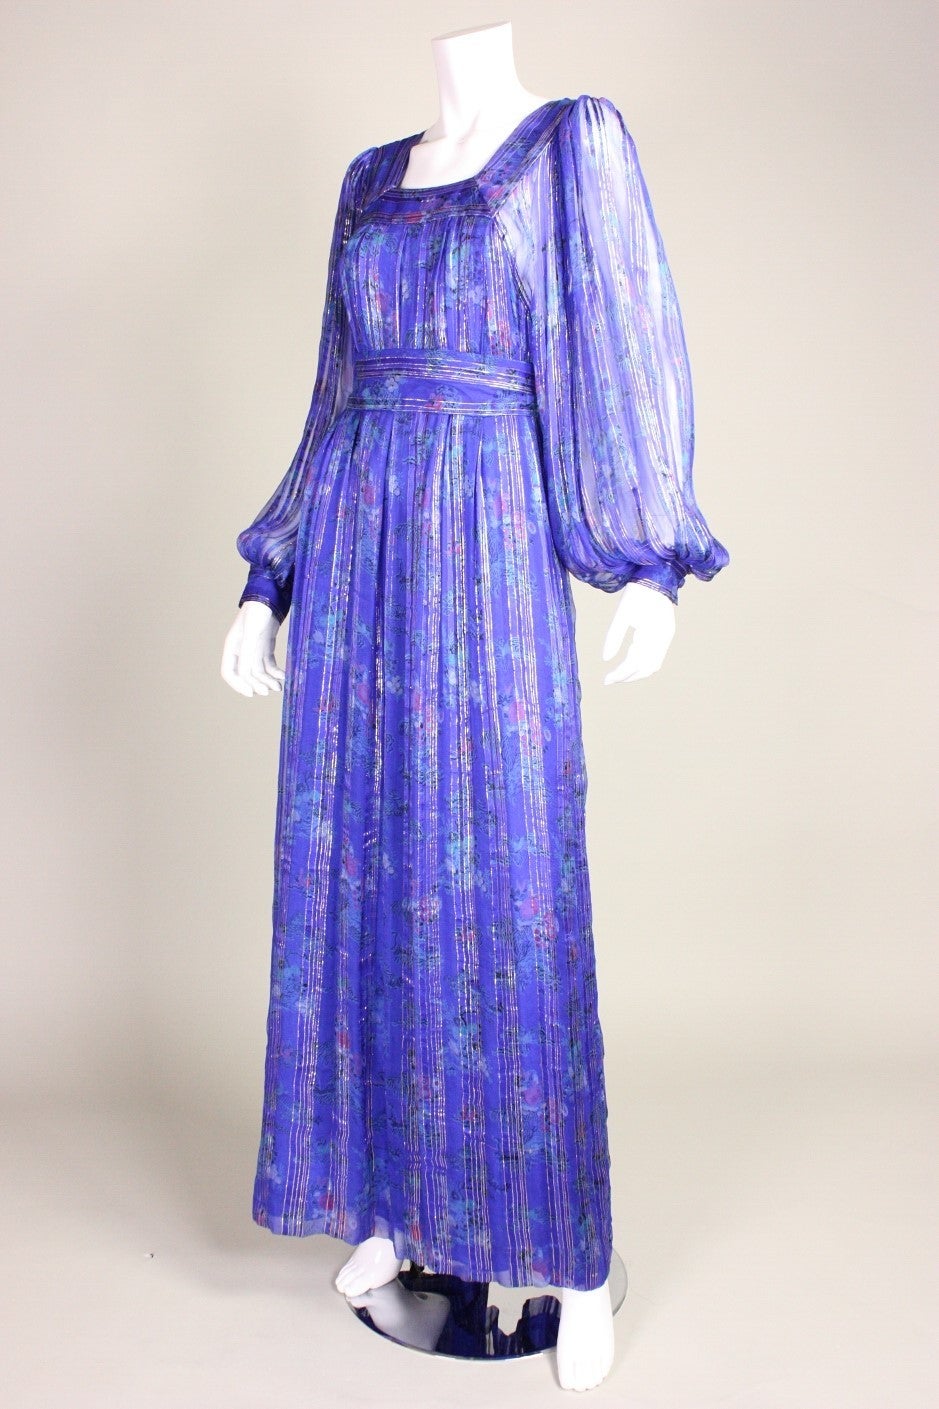 Vintage maxi dress from Raksha dates to the 1970's and is made of printed blue/purple silk chiffon with gold stripes.  Long sleeves button at the cuffs. Lined except for in sleeves. Center back zipper.

Labeled size Medium.

Measurements-
Bust: